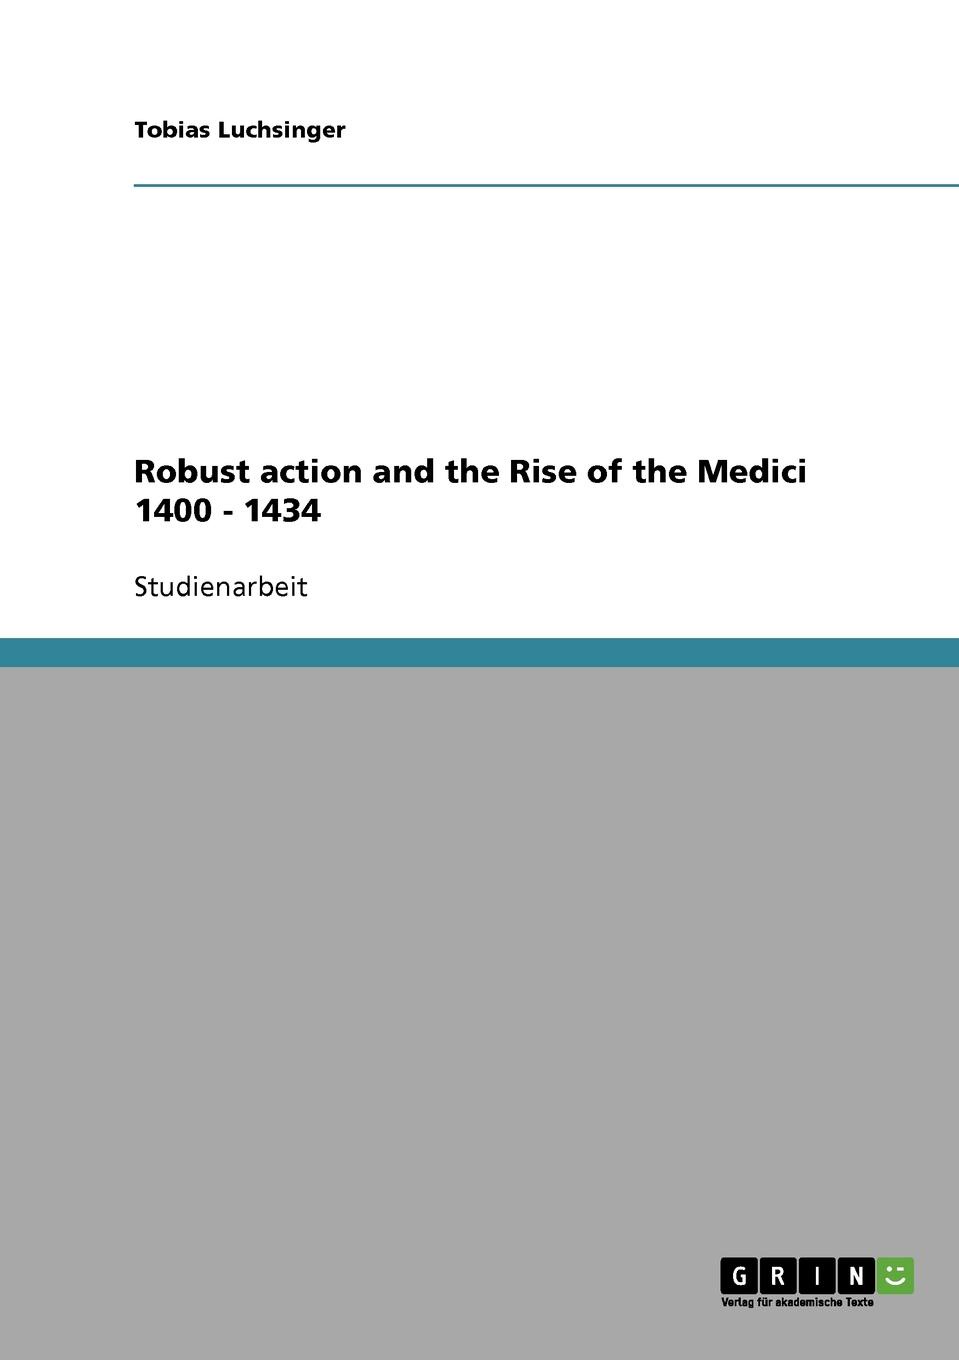 Robust action and the Rise of the Medici 1400 - 1434